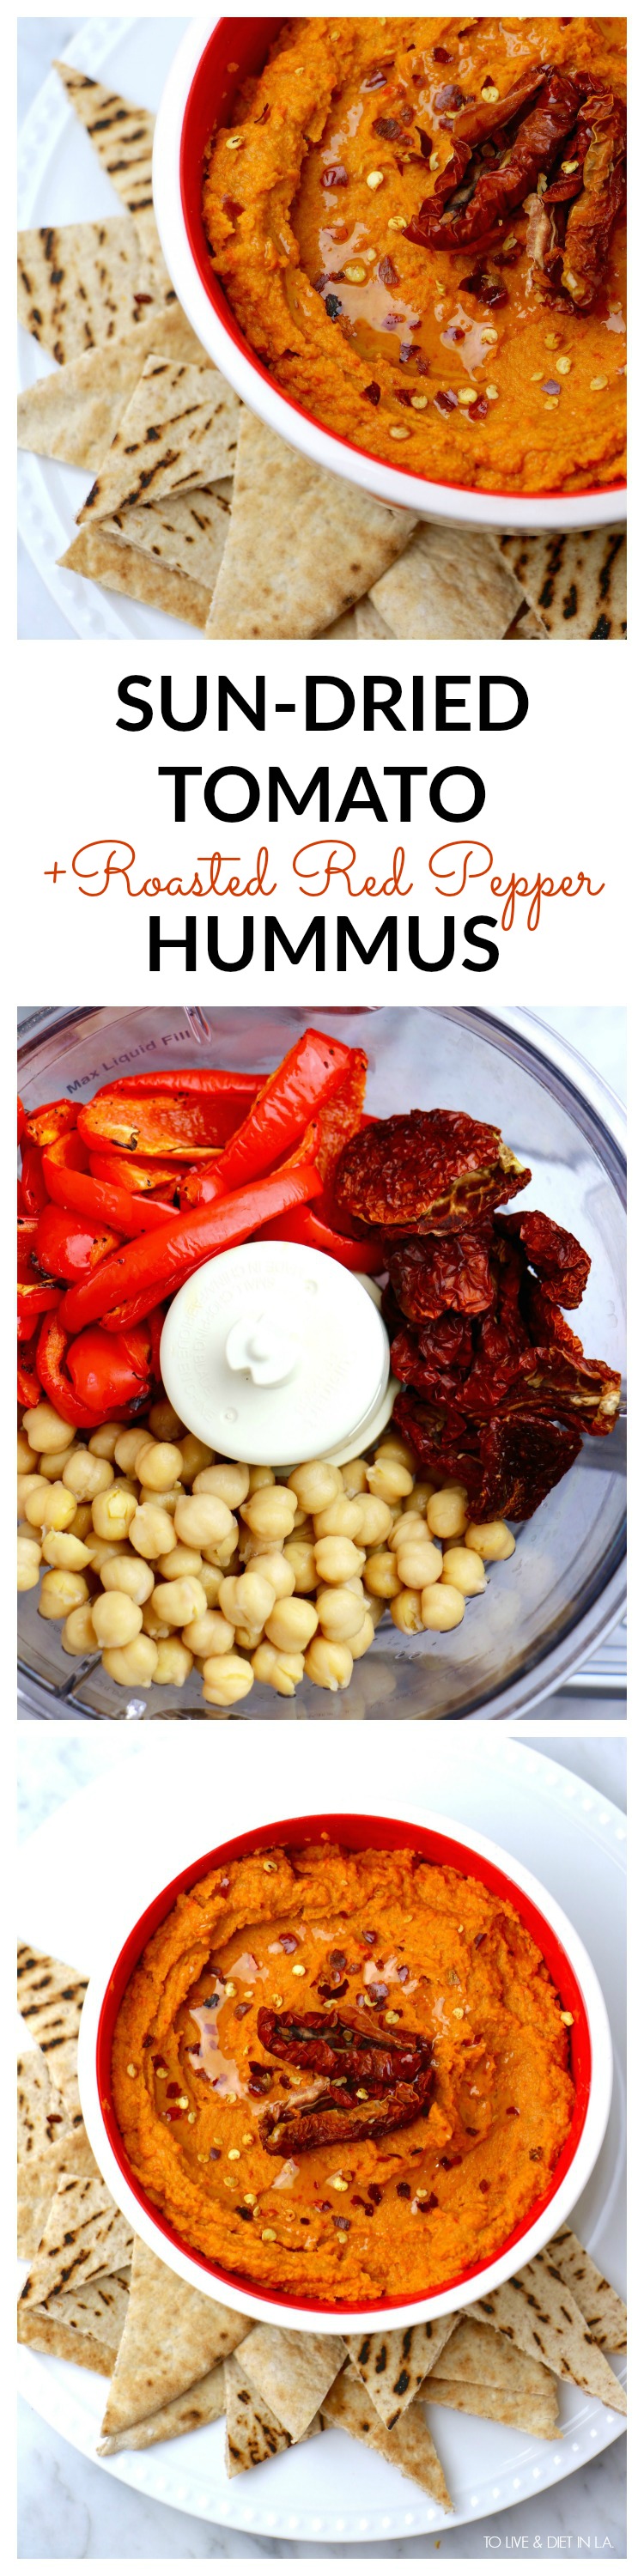 Roasted Red Pepper + Sun Dried Tomato Hummus